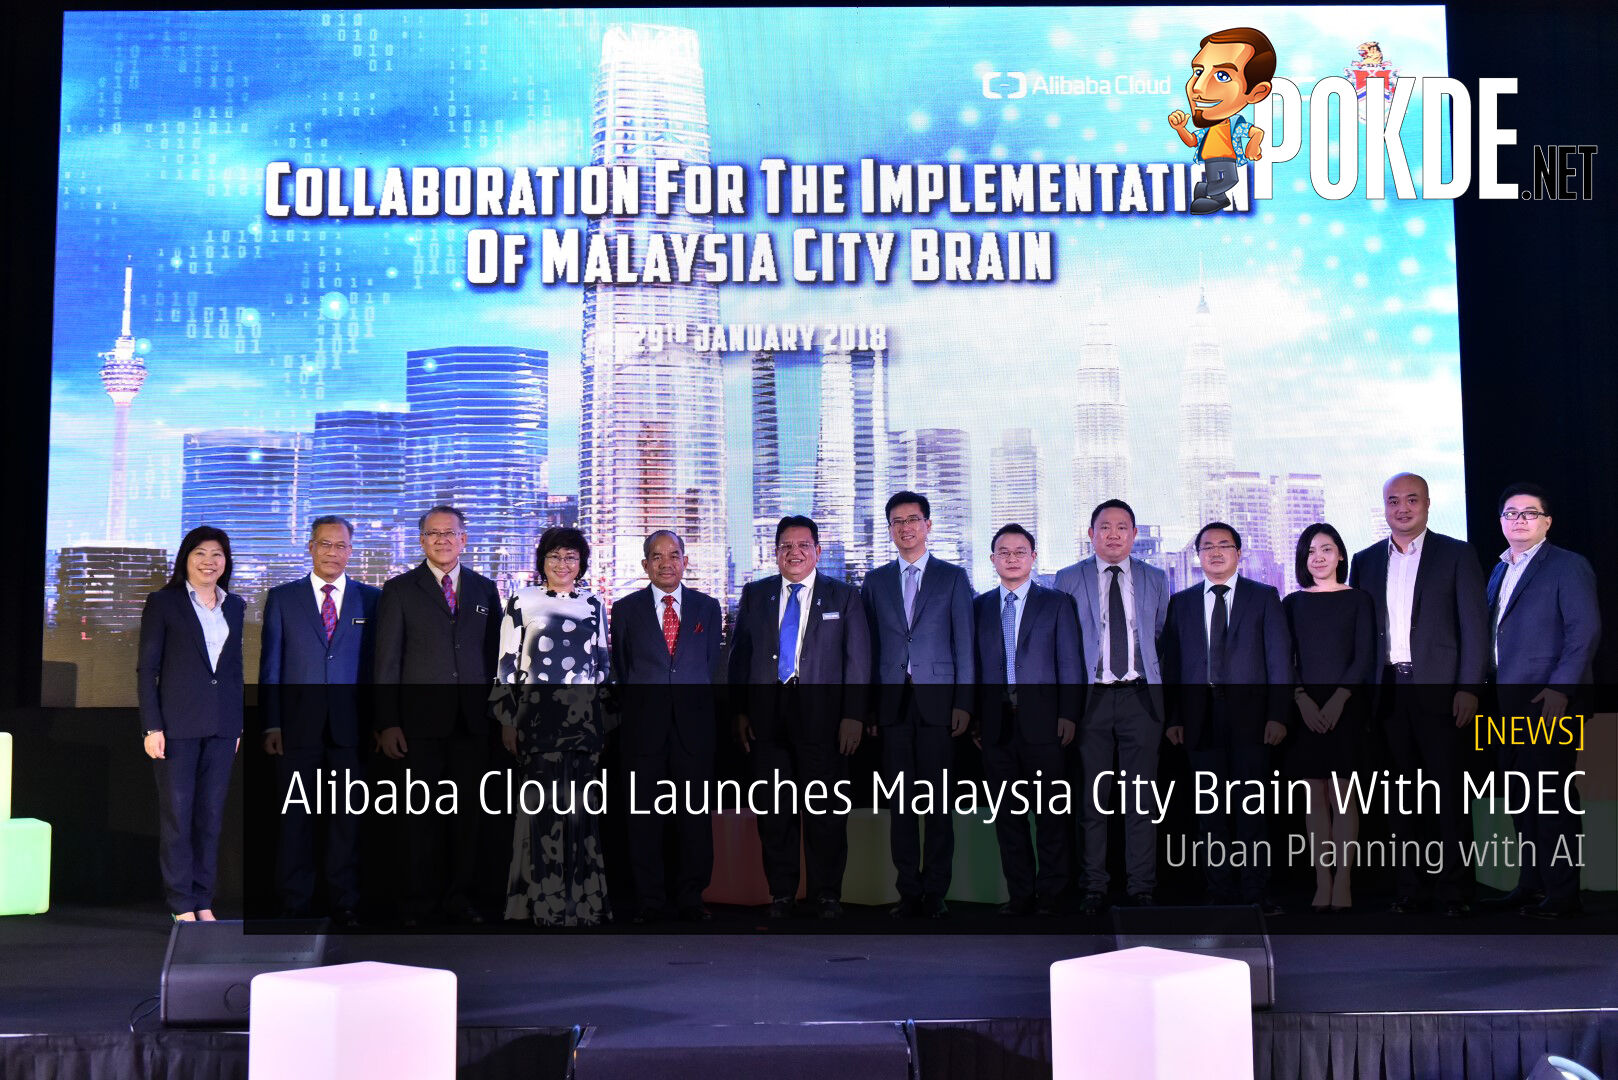 Alibaba Cloud Launches Malaysia City Brain With MDEC - Urban Planning with AI 25